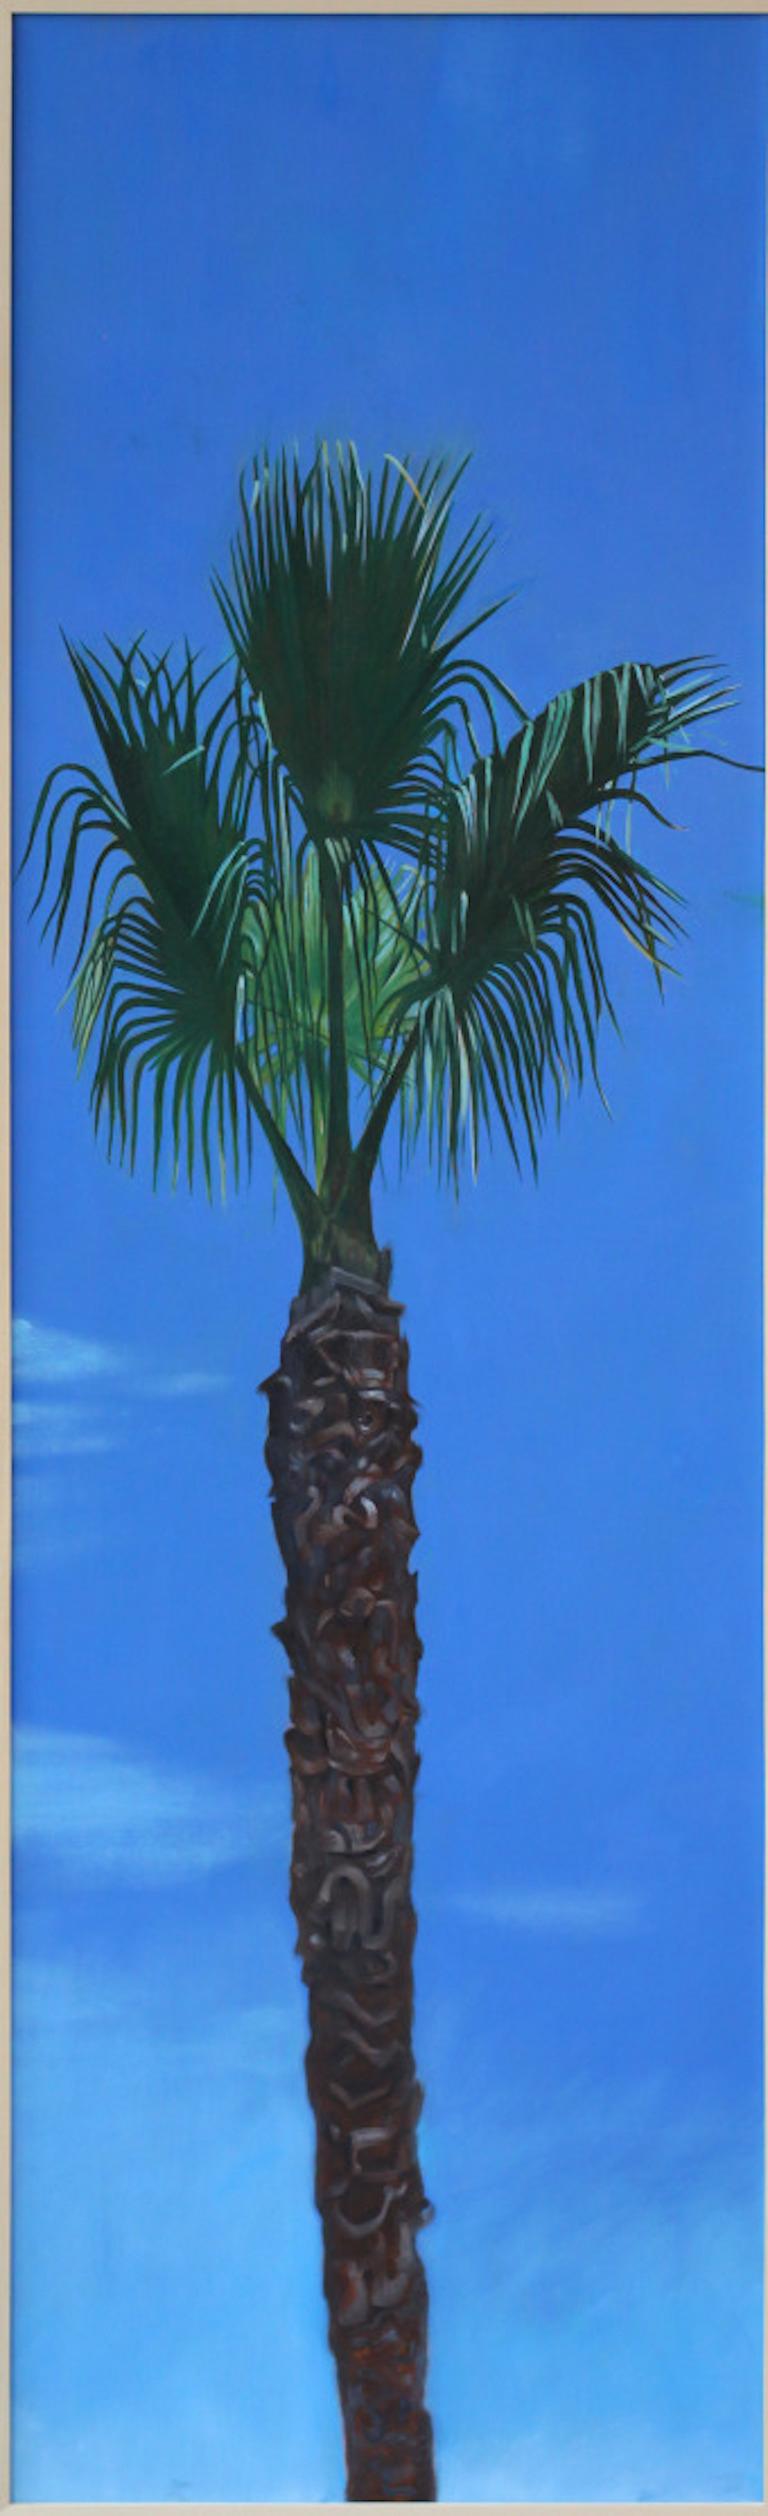 Perry Vàsquez Landscape Painting - Contemporary Realist Palm Tree Painting, "Oasis 2"